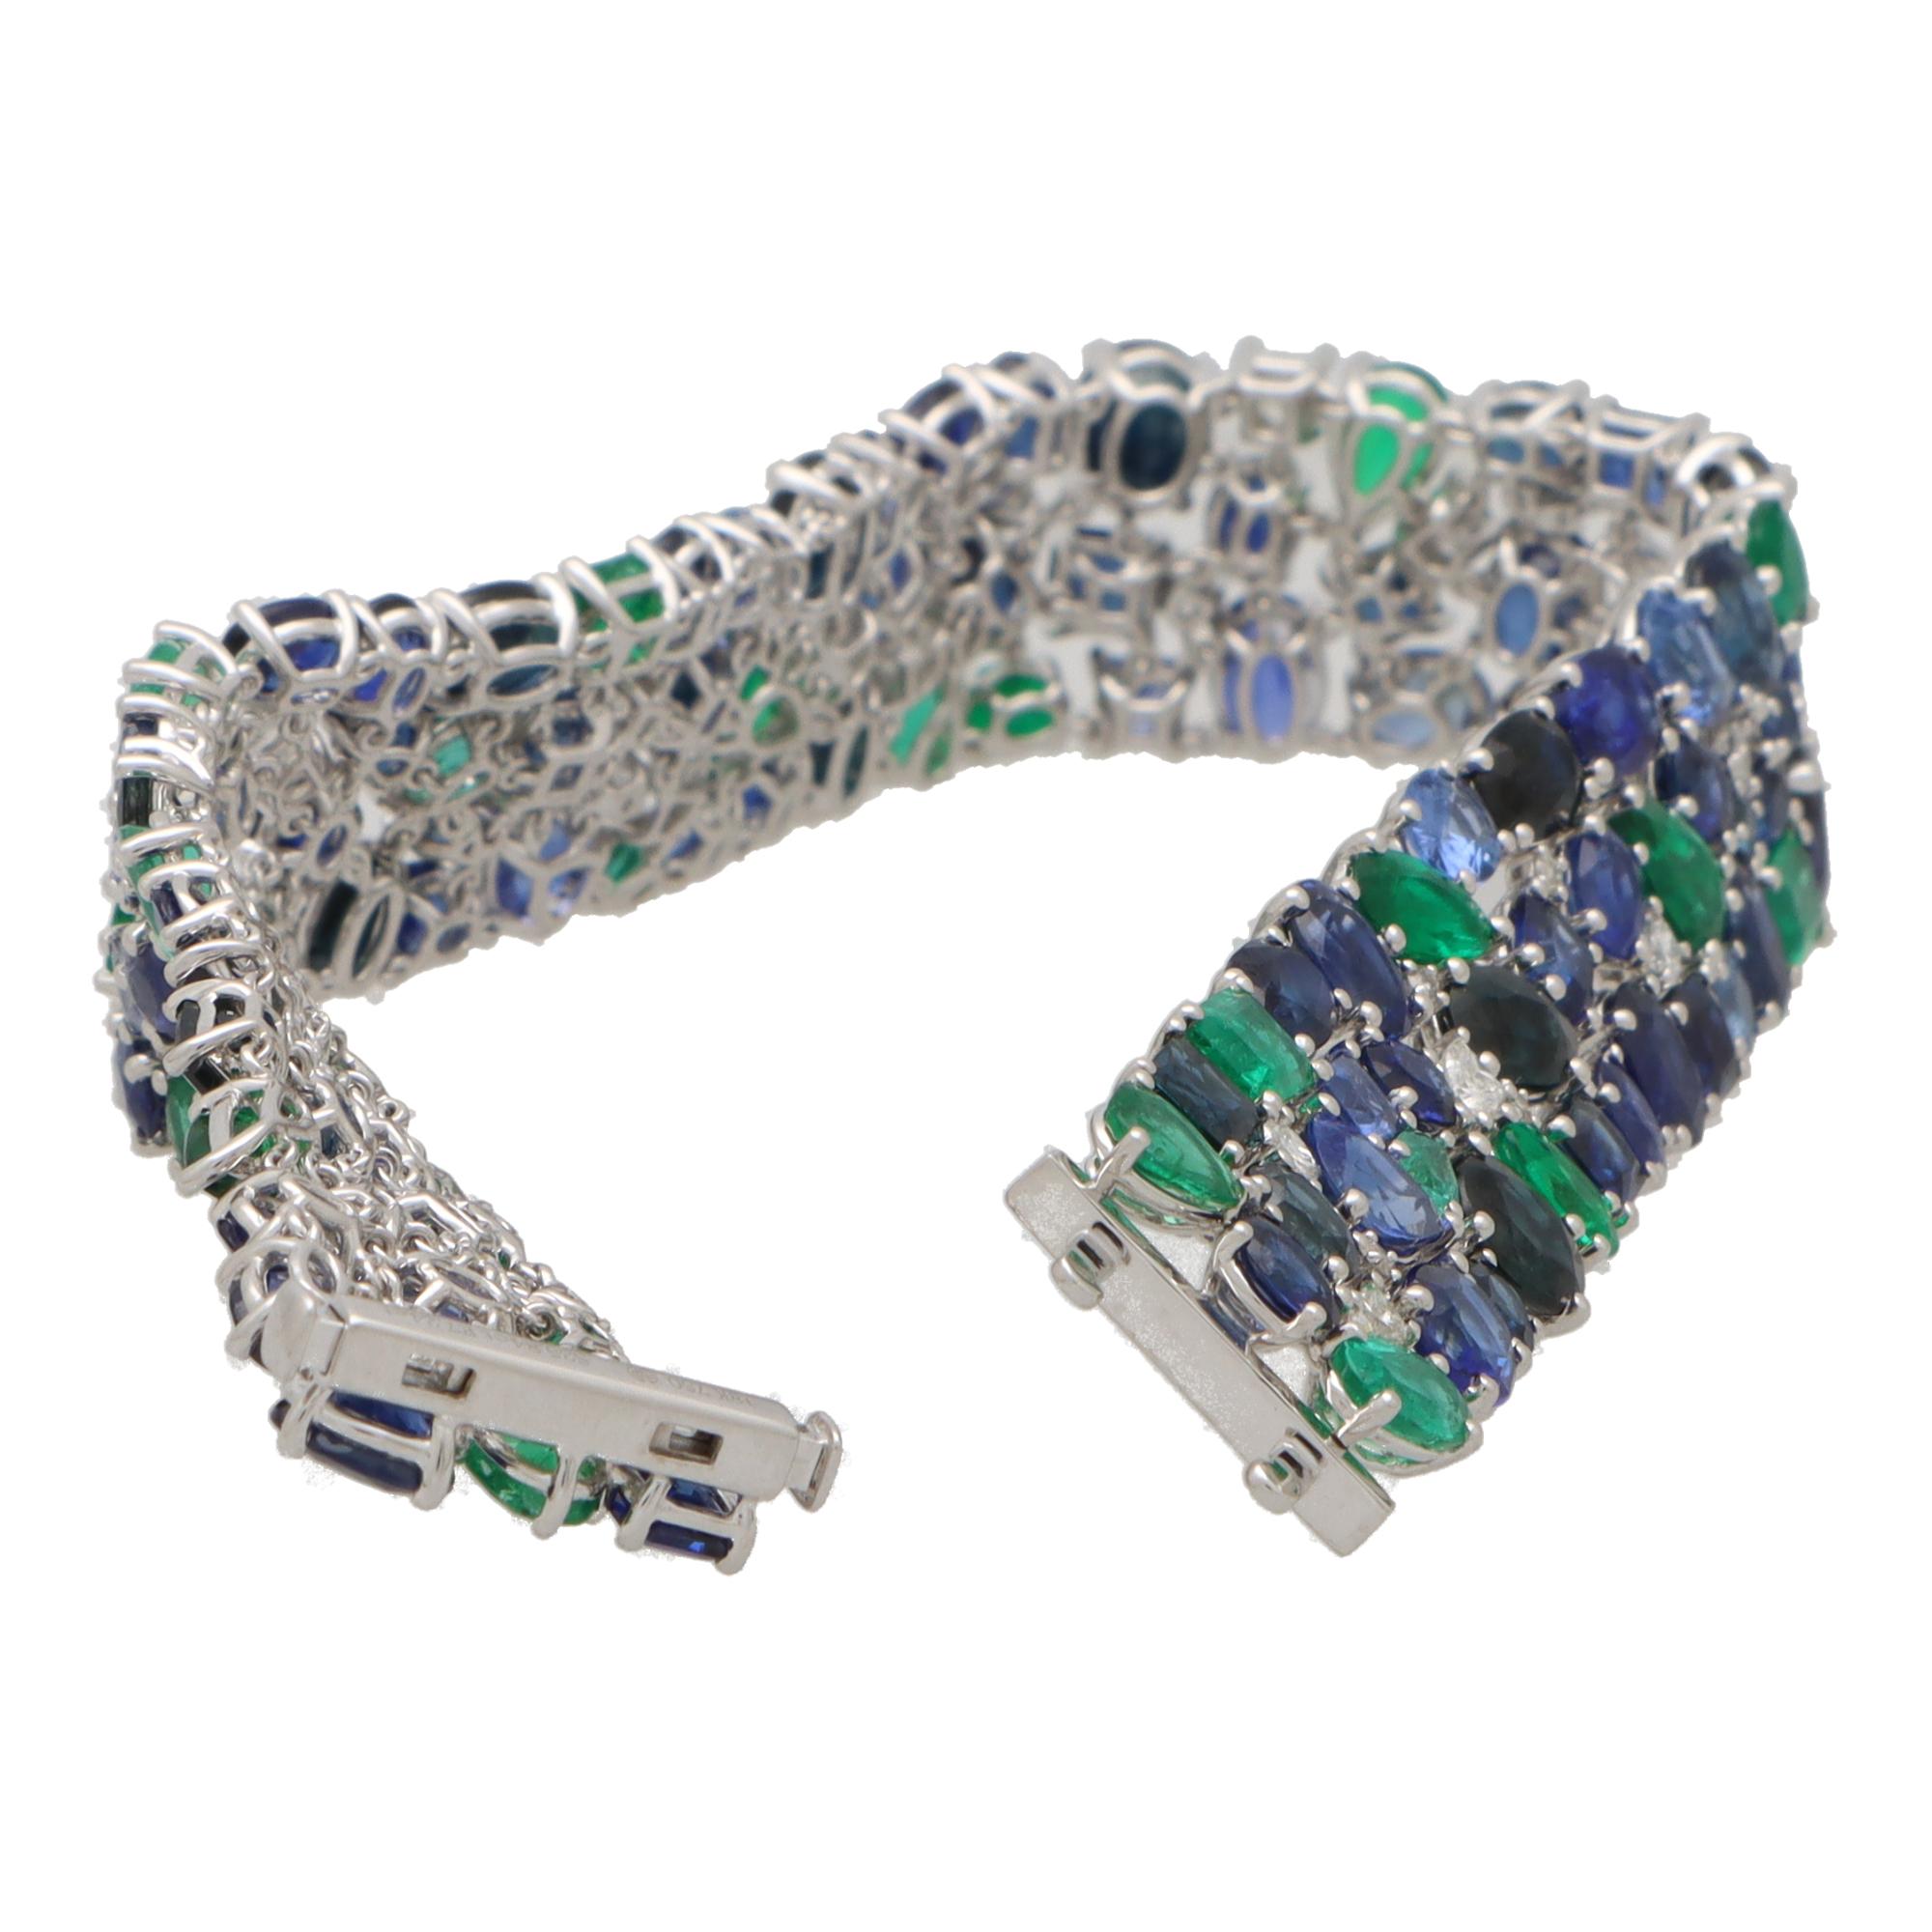 Modern Contemporary Blue Sapphire, Emerald and Diamond Bracelet Set in 18k White Gold For Sale